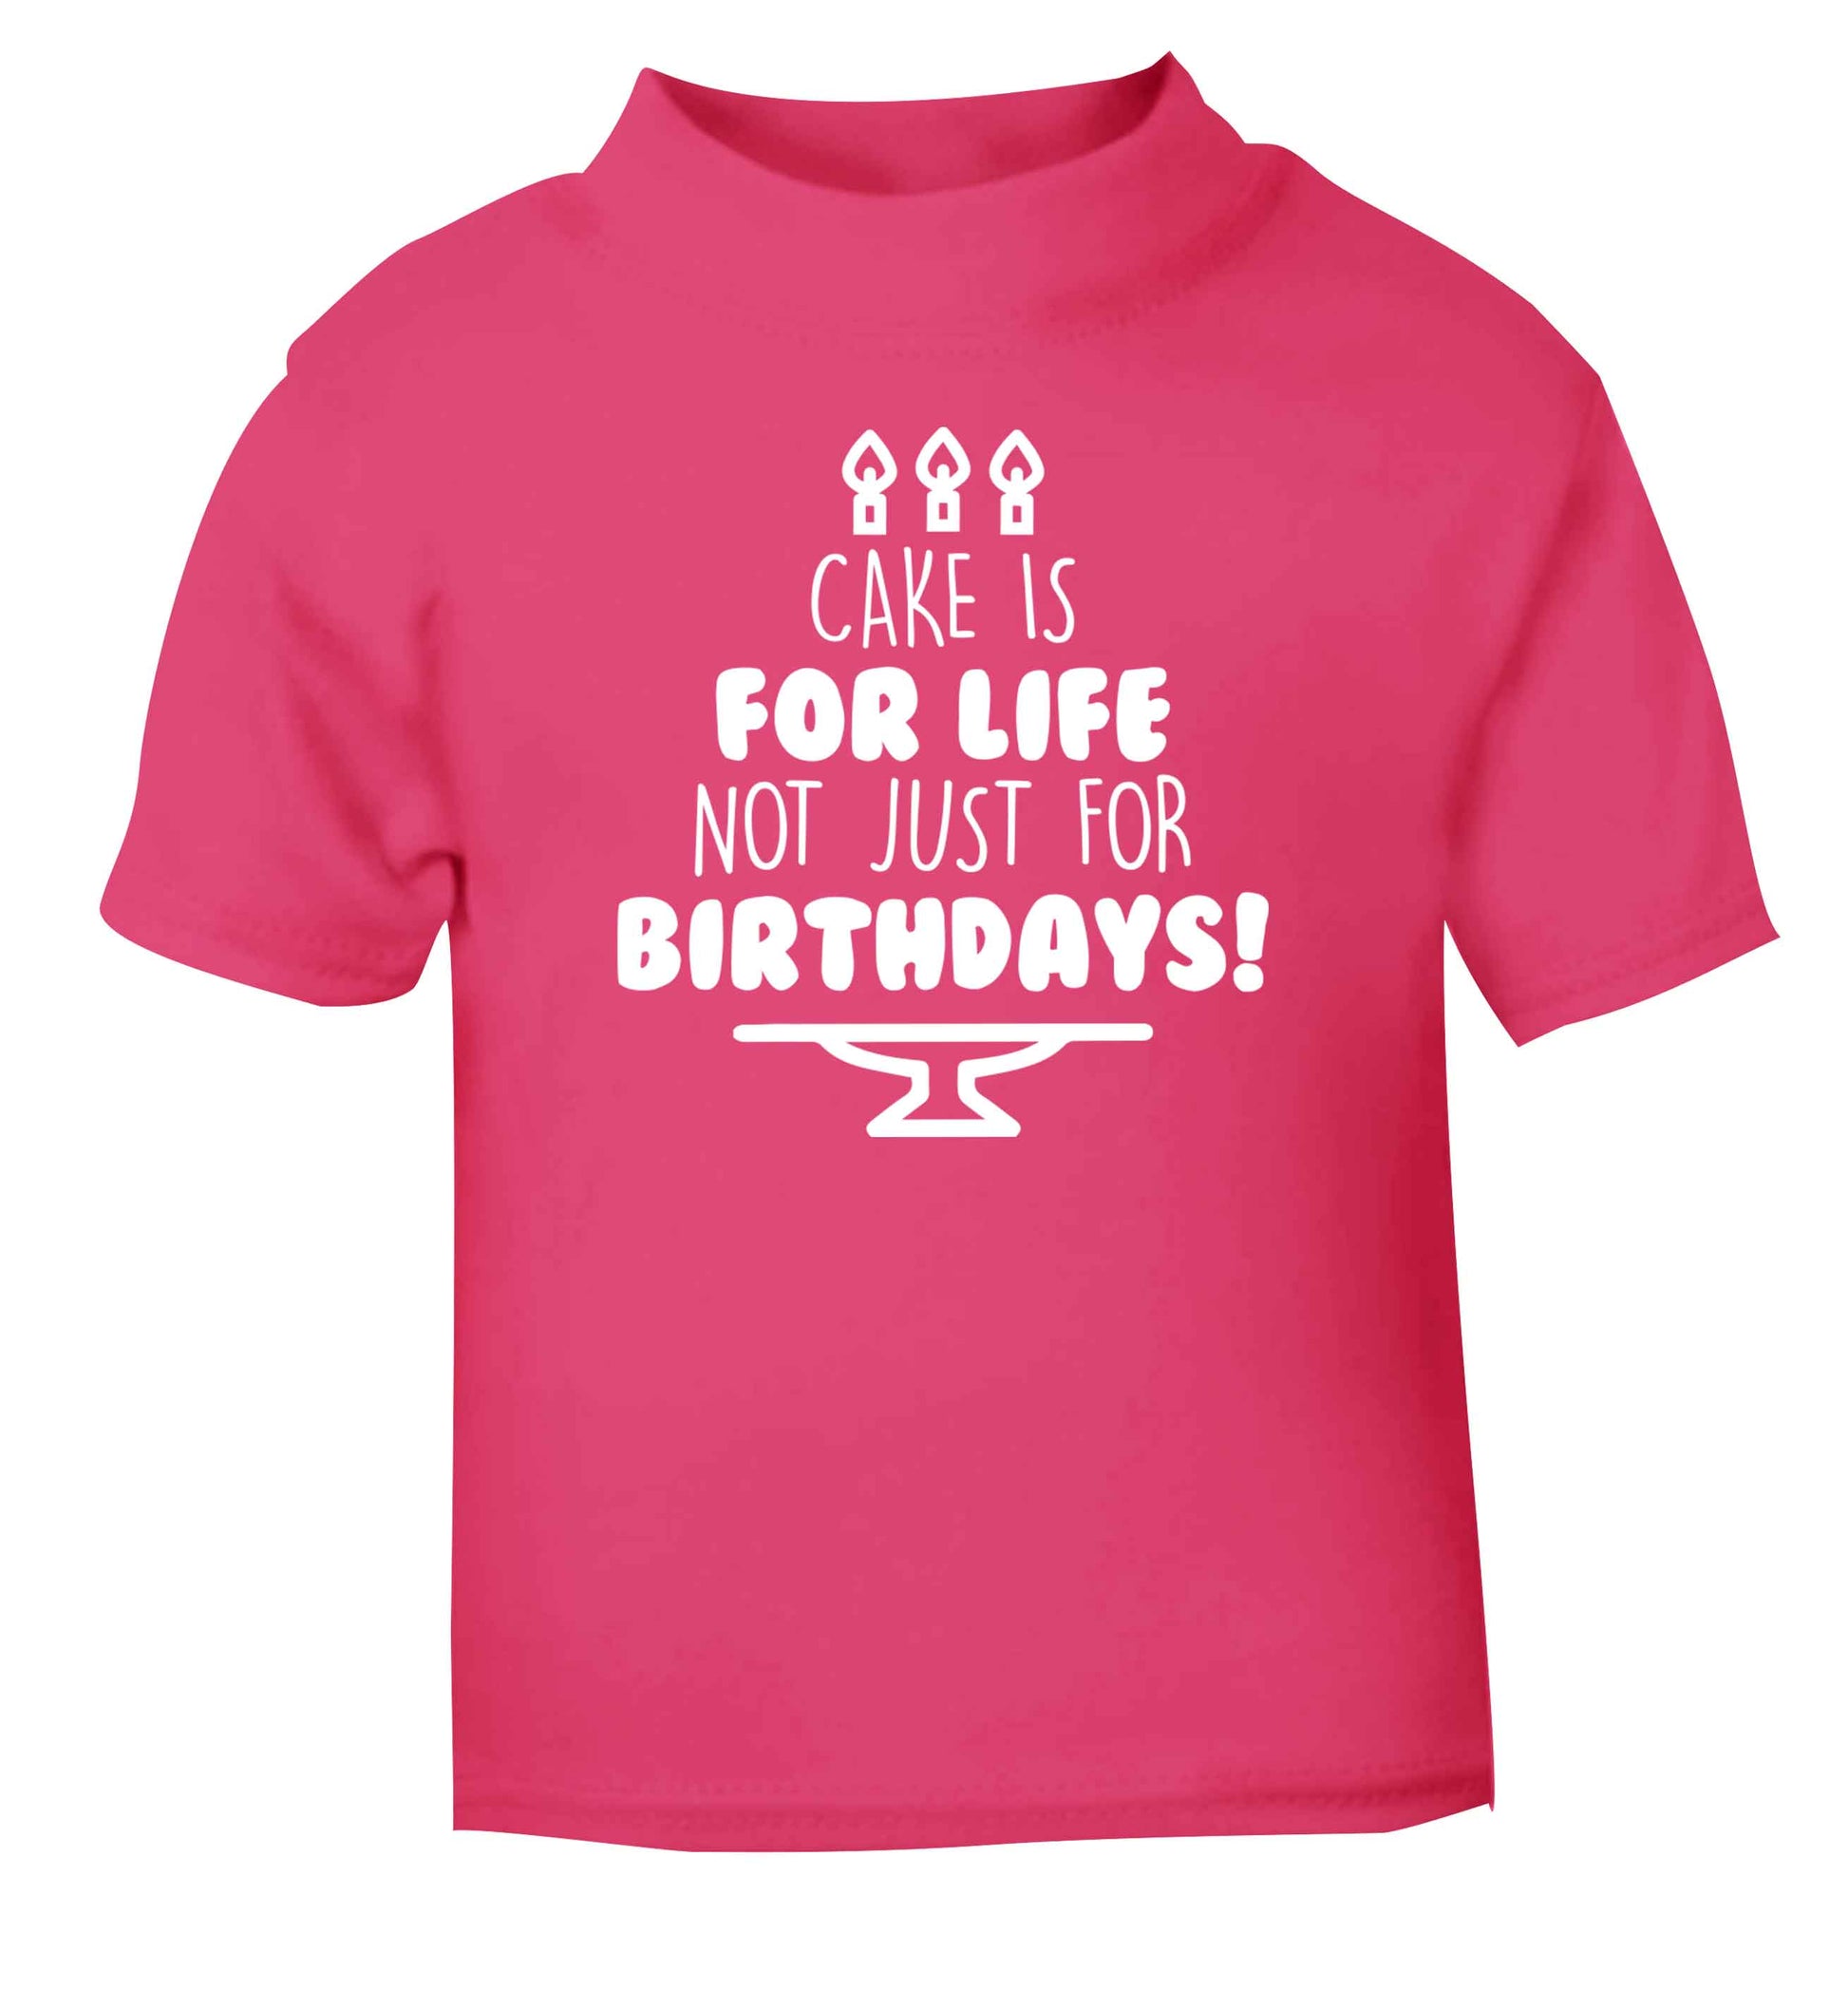 Cake is for life not just for birthdays pink Baby Toddler Tshirt 2 Years